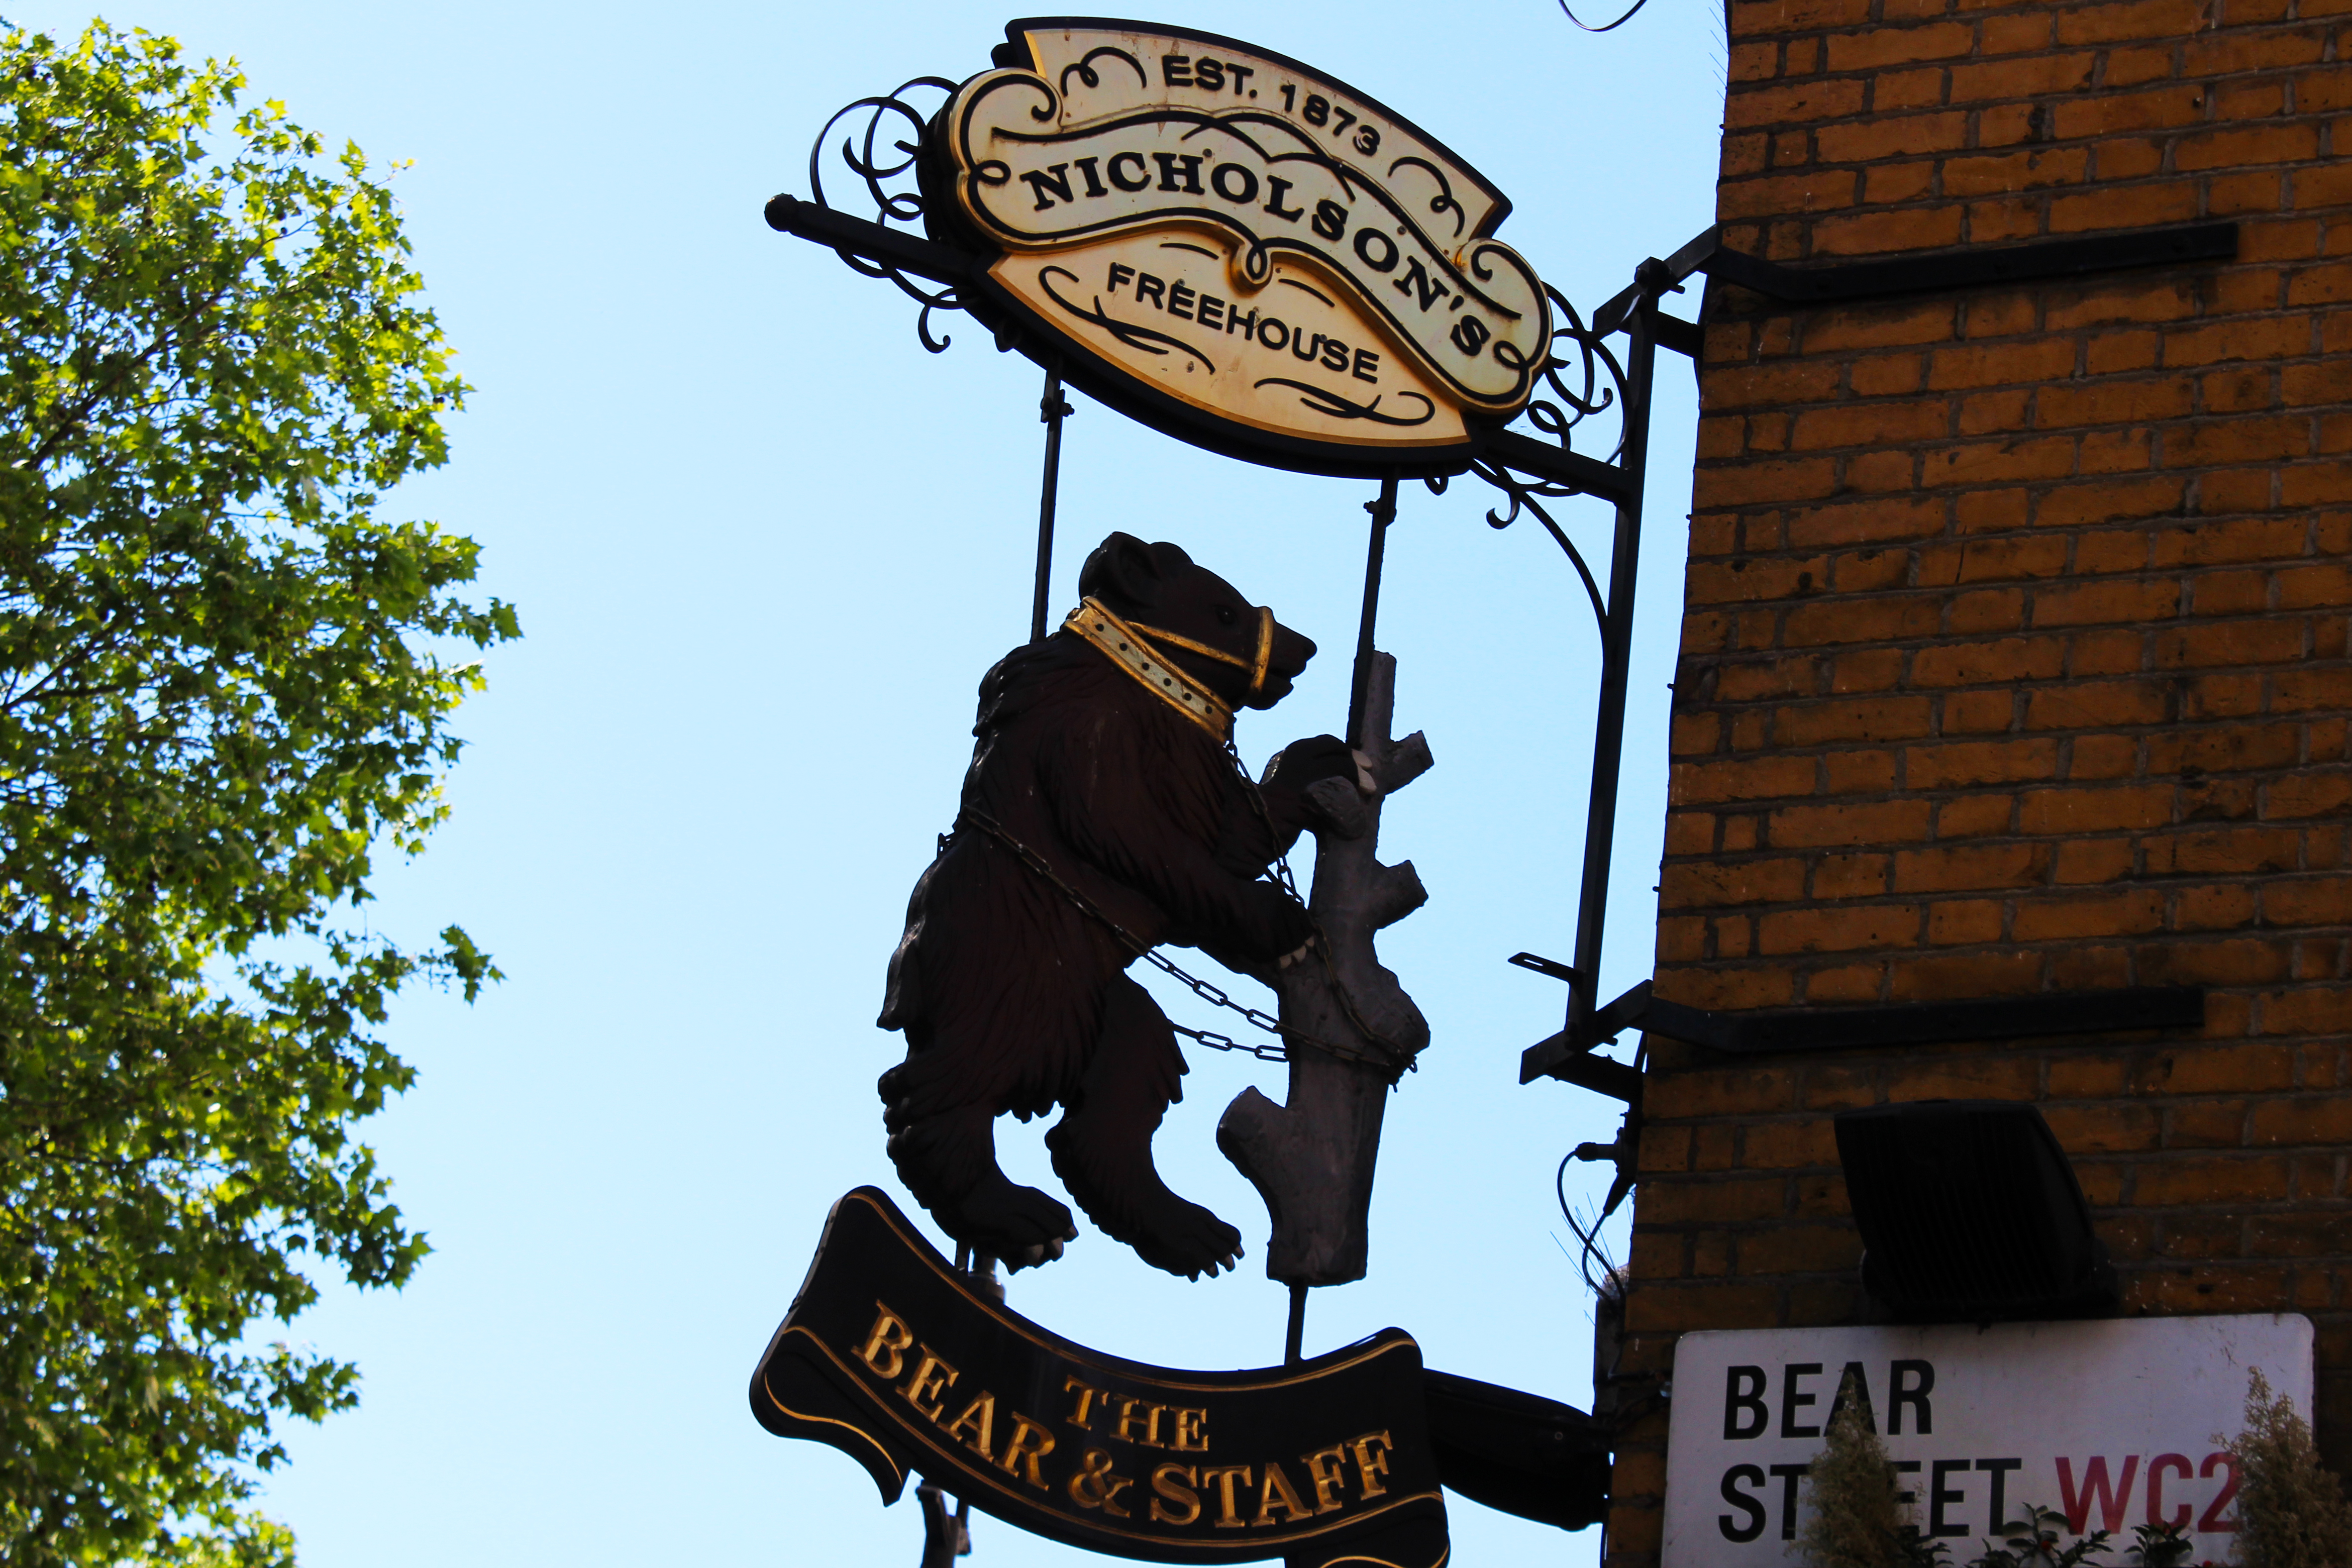 The Bear and Staff, Leicester Square, WC2